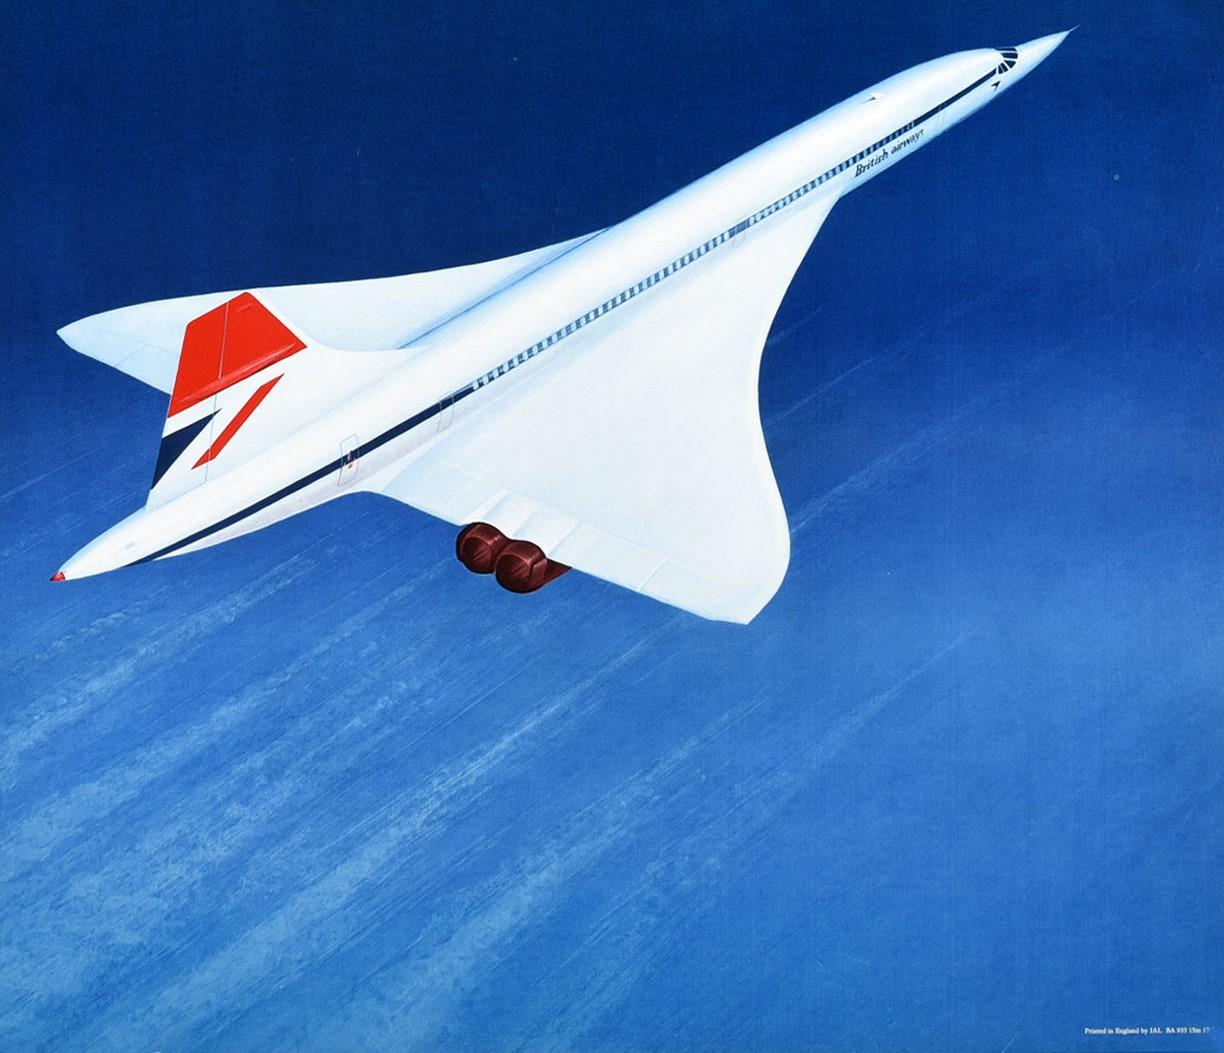 Original vintage travel advertising poster for British Airways Concorde featuring a colourful image of an iconic Concorde plane flying against the deep blue sky with the stylised bold lettering and crown logo inside the C above. Produced from